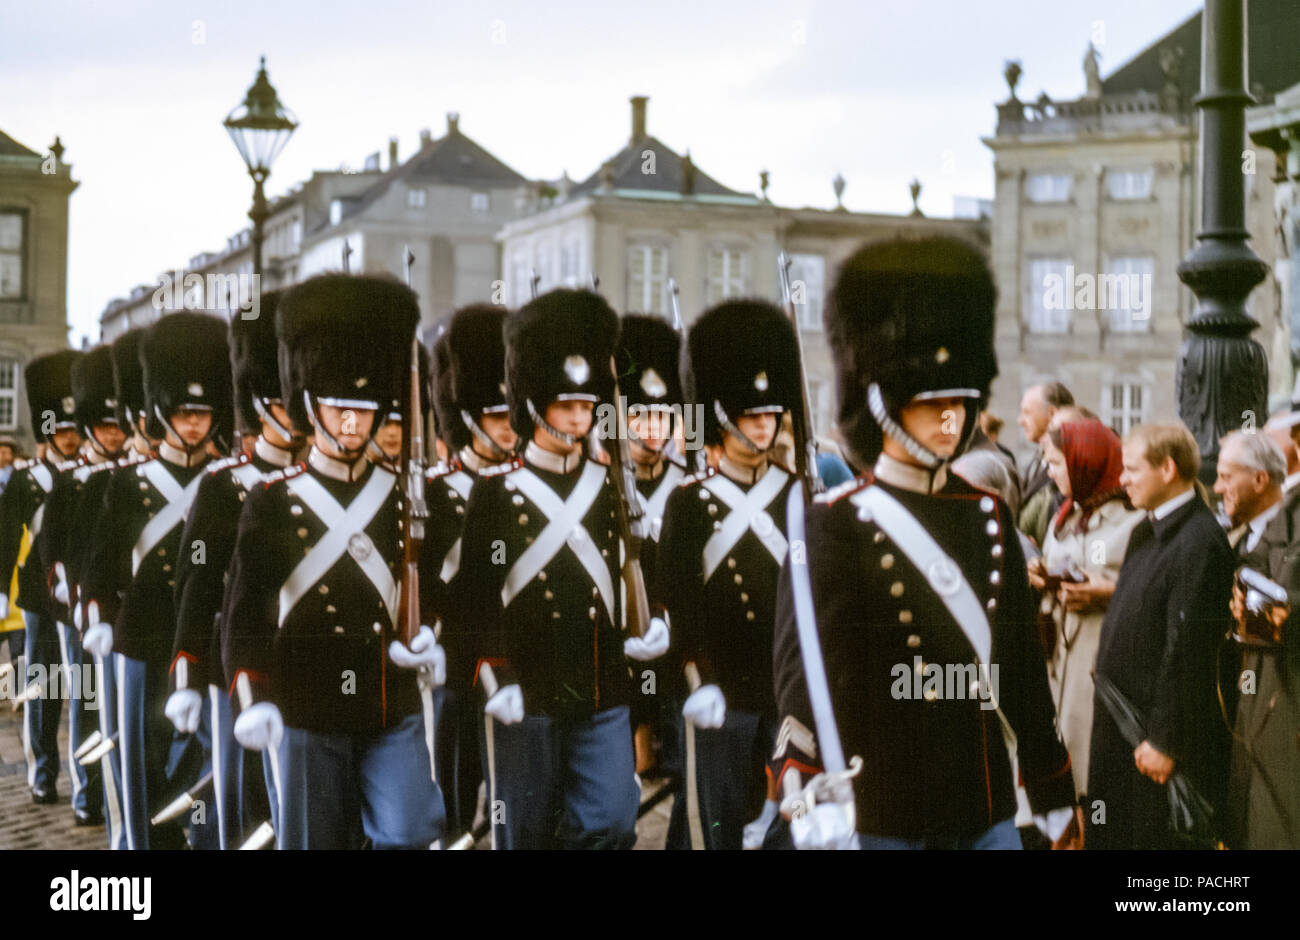 Crowd of tourists watching Danish Royal Guard wearing uniforms and bearskin  hats carrying rifles marching at